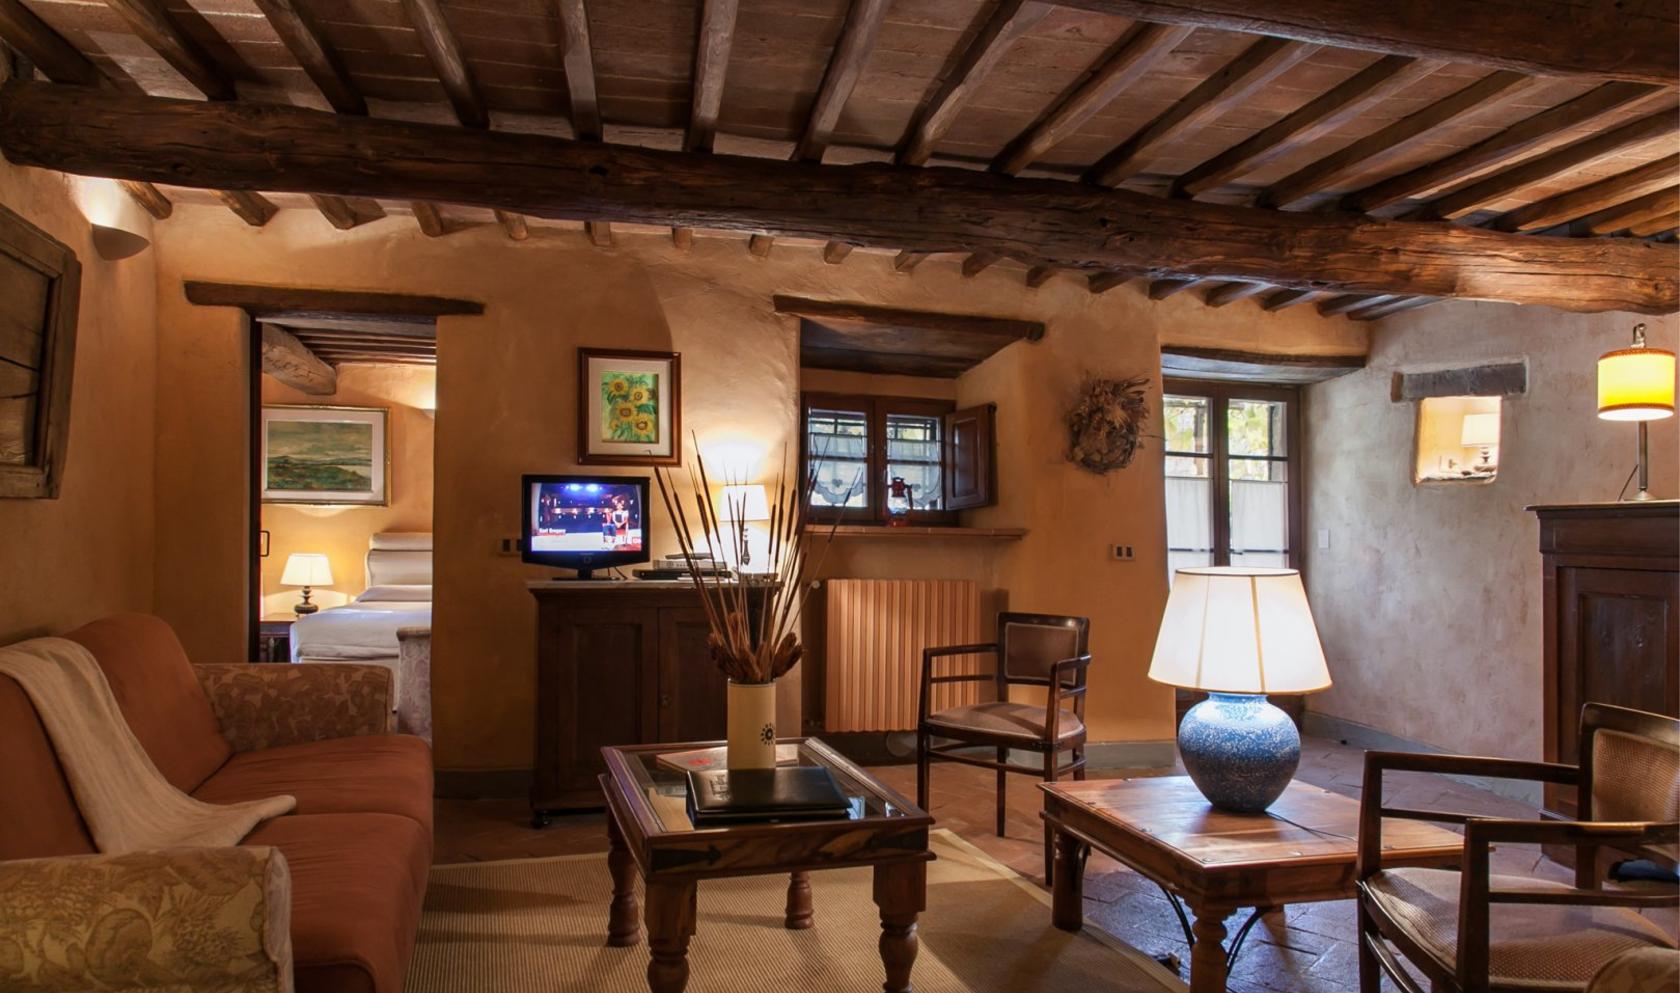 Toscana Immobiliare - The residence has a large open plan sitting room and dining area, with comfortablesofas, rural wooden dining table and benches